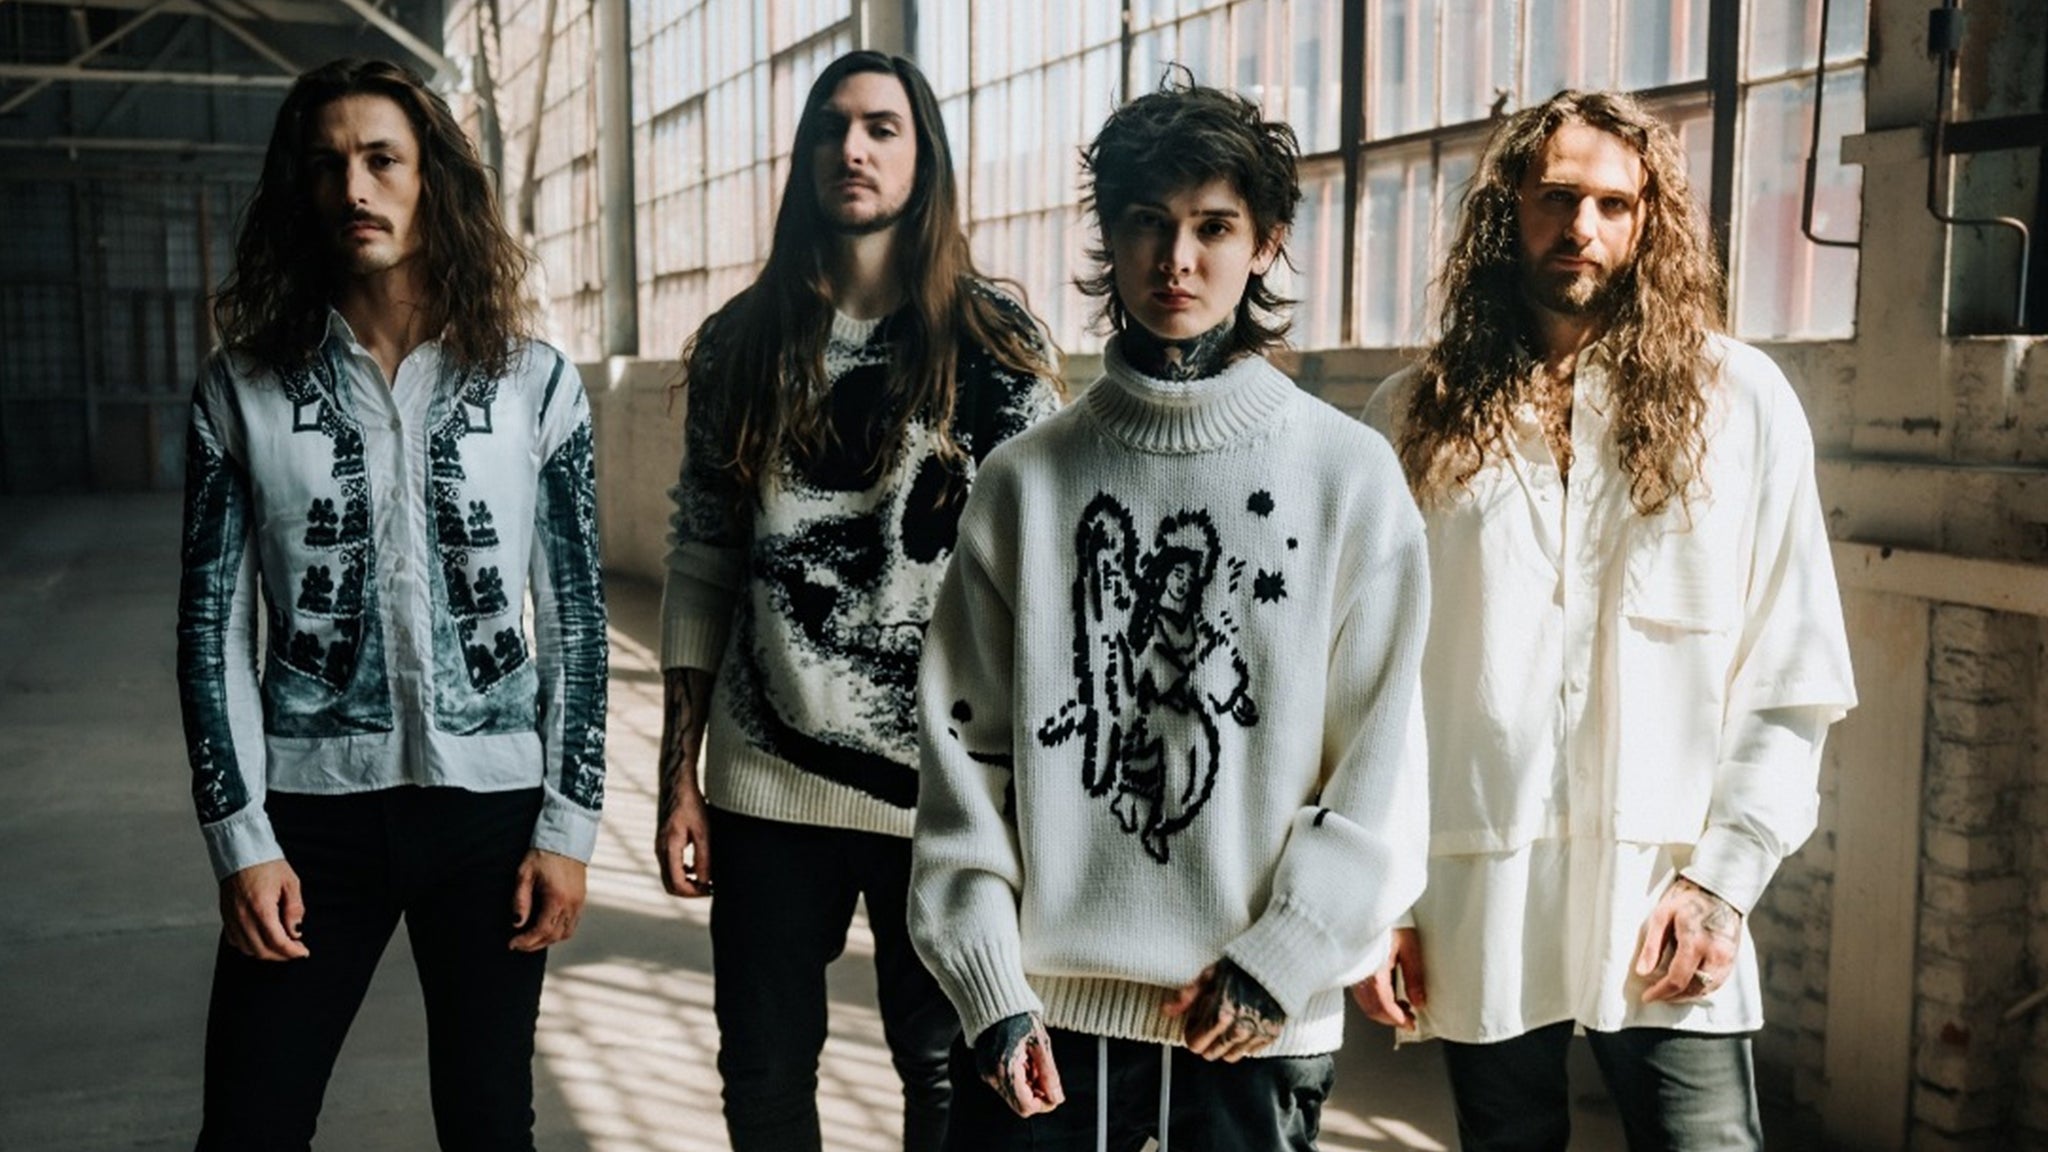 Polyphia - Remember That You Will Die Tour presale password for event tickets in Raleigh, NC (The Ritz)